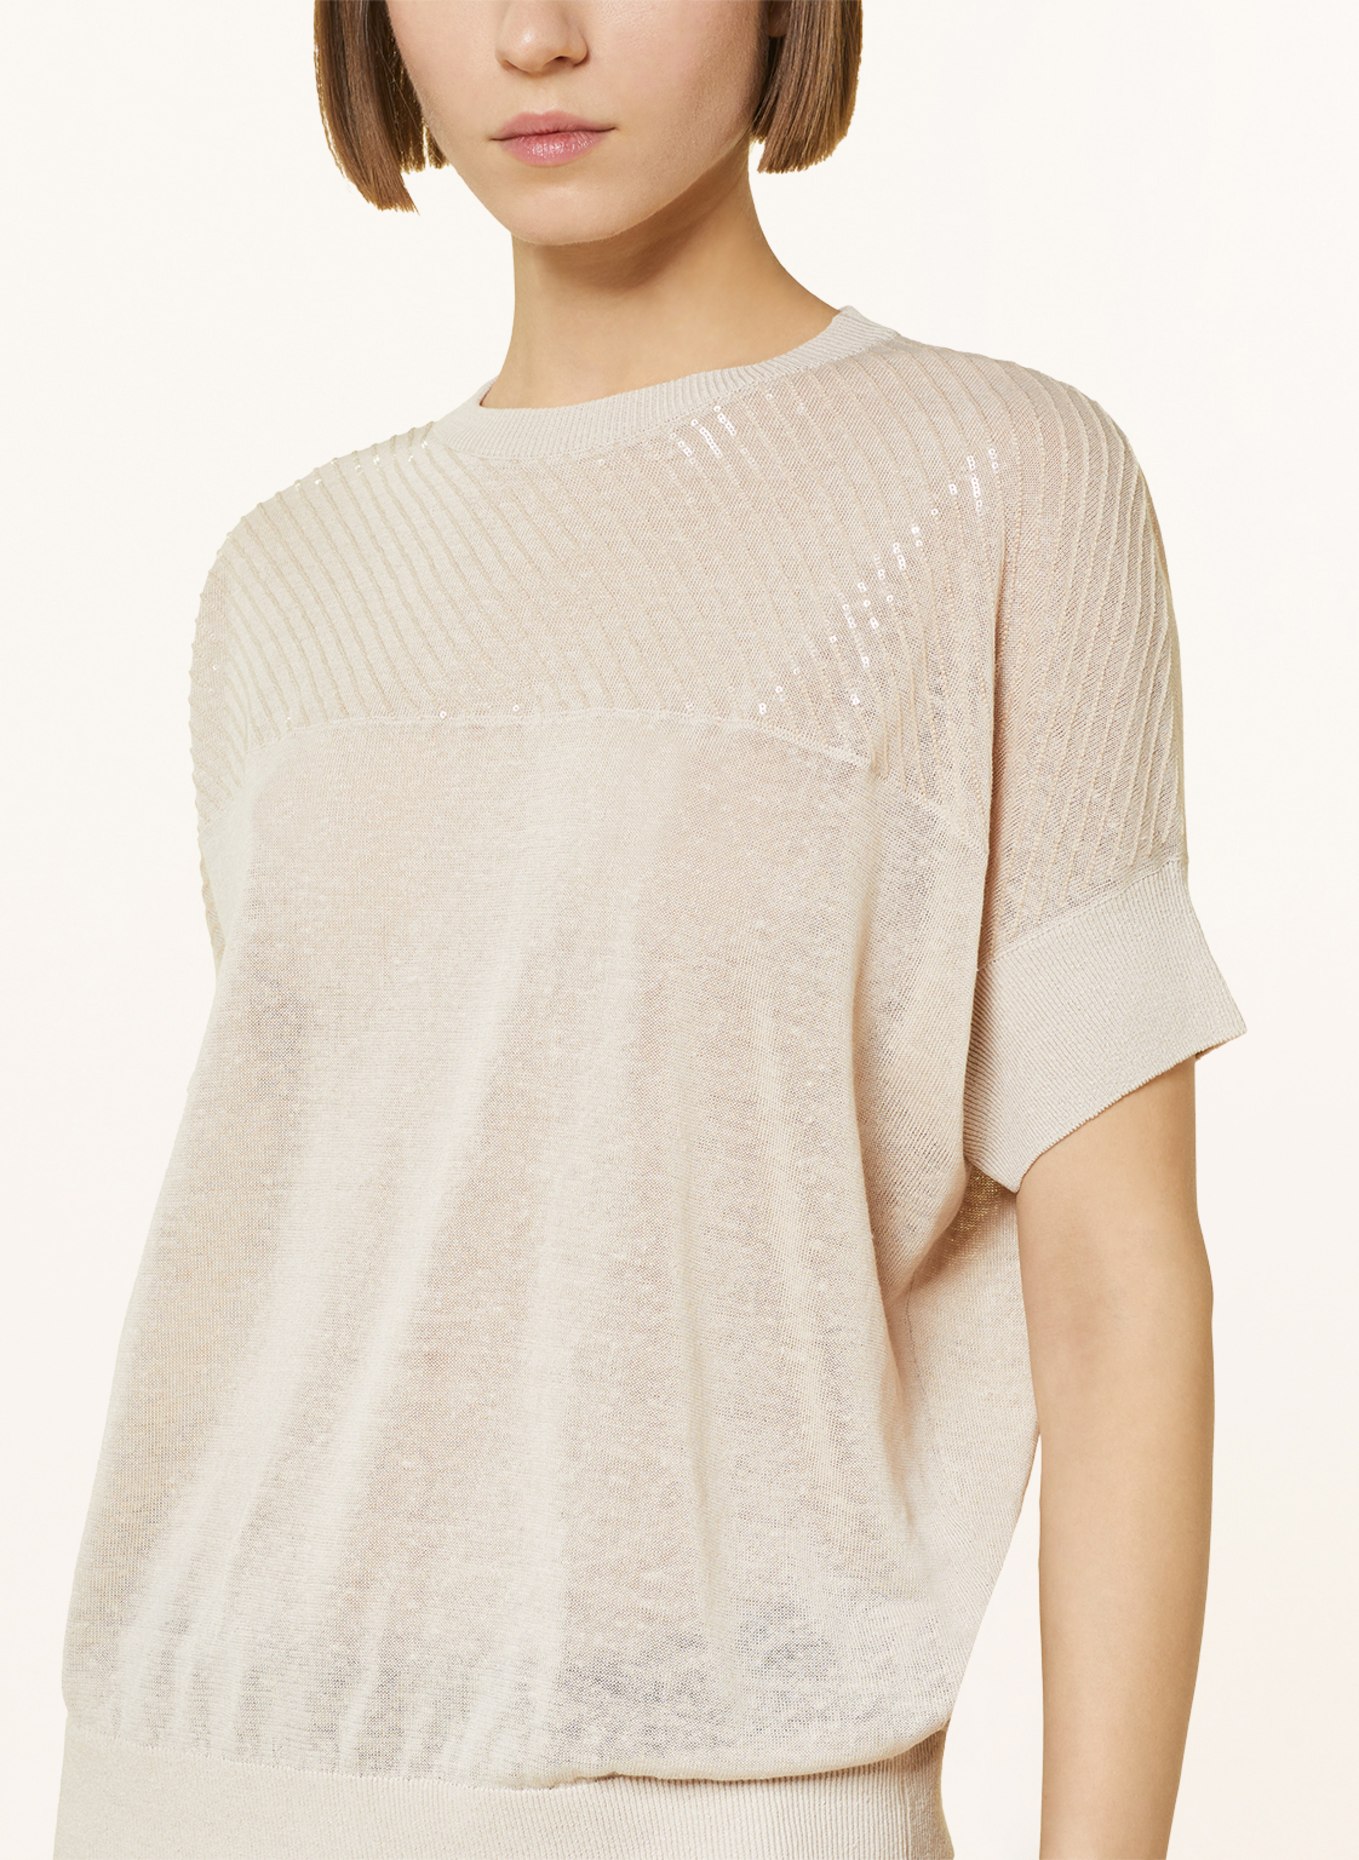 BRUNELLO CUCINELLI Knit shirt made of linen with sequins, Color: CREAM (Image 4)